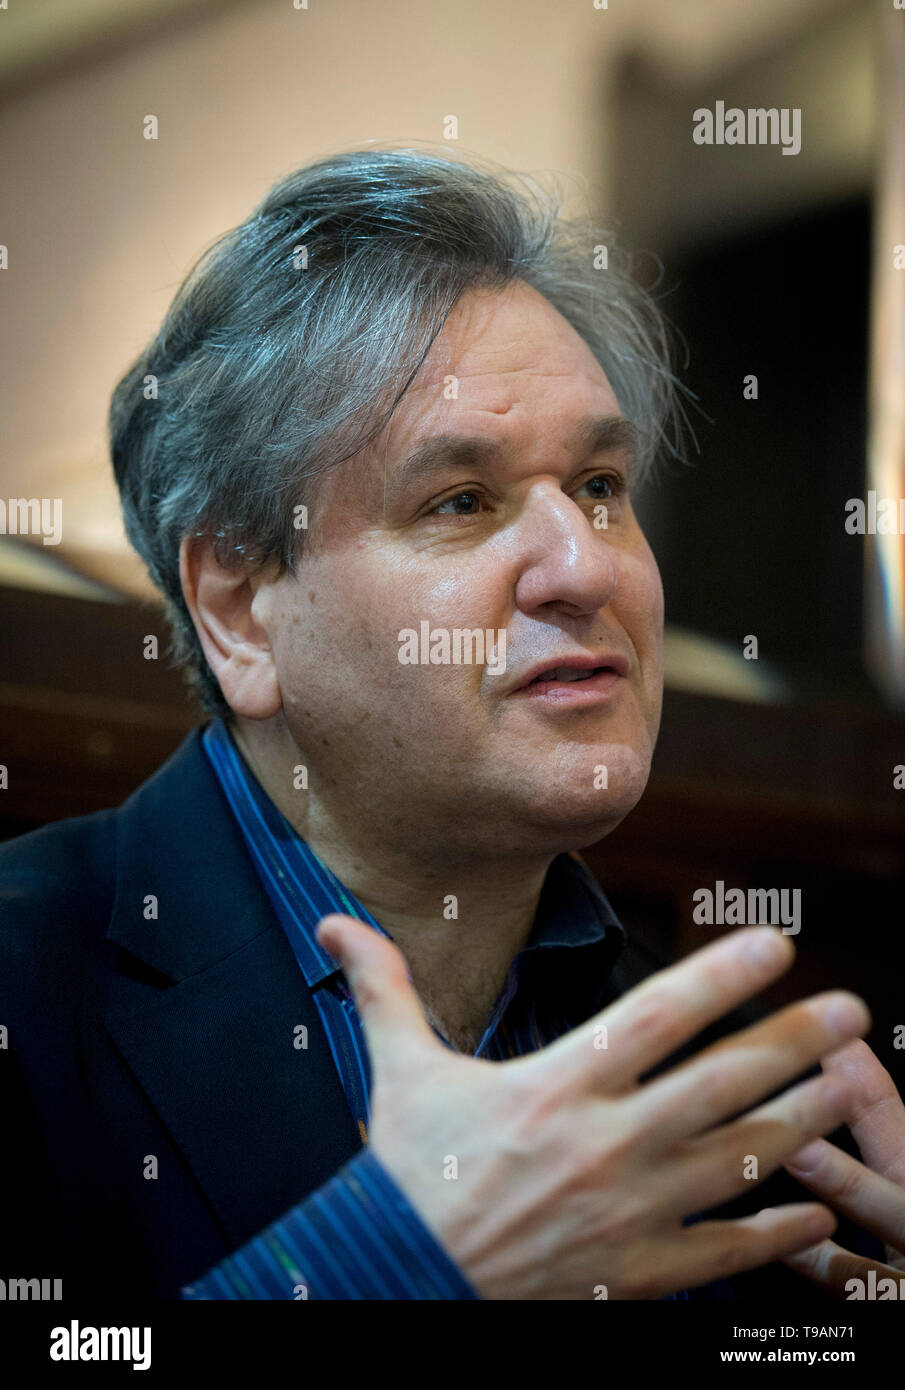 Prague, Czech Republic. 17th May, 2019. Chief conductor Sir Antonio Pappano attends the press conference prior to Concert by Orchestra dell'Accademia Nazionale di Santa cecilia Roma during the Prague Spring International Music Festival in Prague, Czech Republic, May 17, 2019. Credit: Katerina Sulova/CTK Photo/Alamy Live News Stock Photo